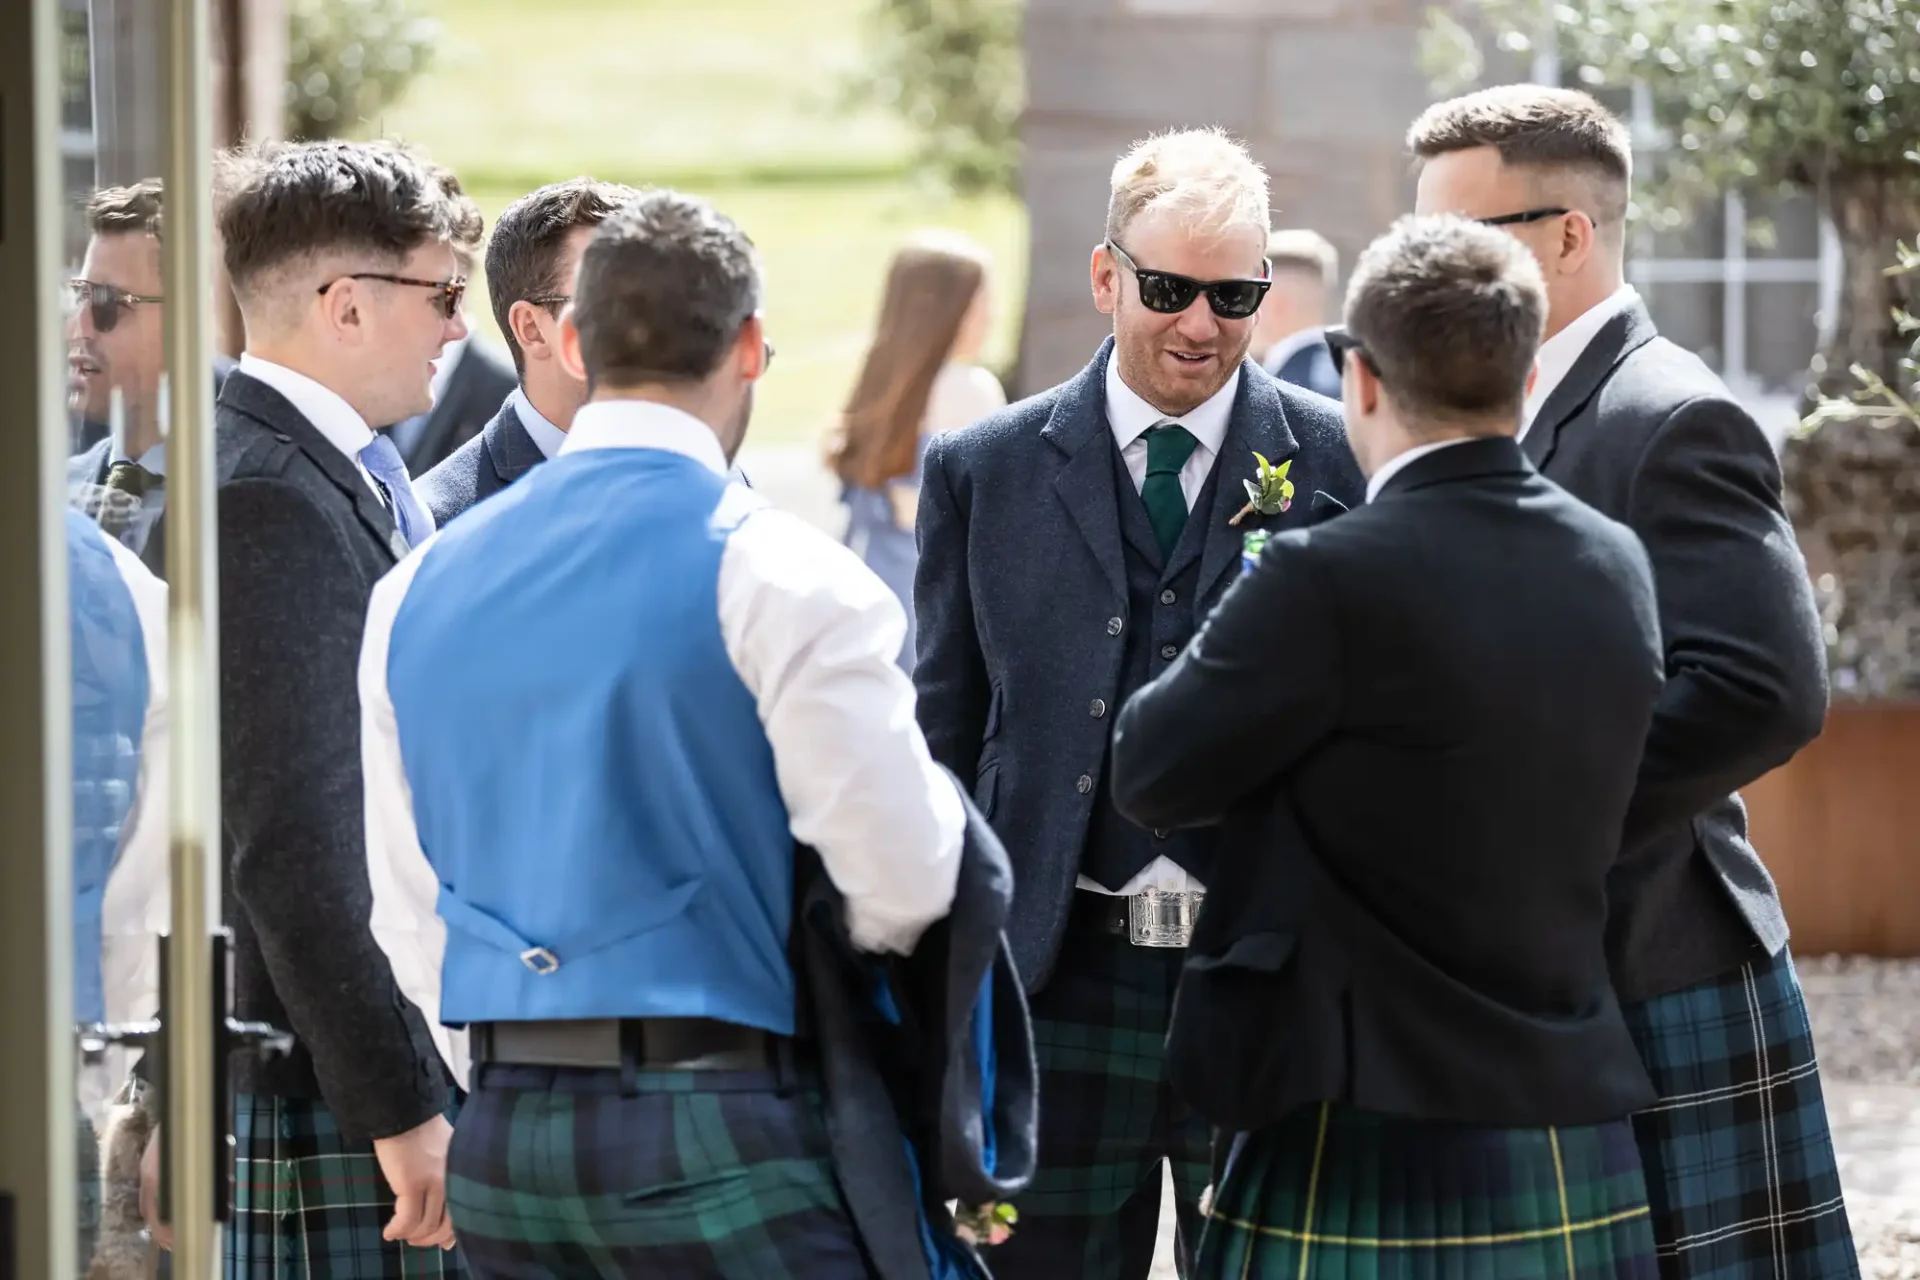 A group of men in kilts and suits conversing outdoors at a formal event, with one man smiling towards the camera.